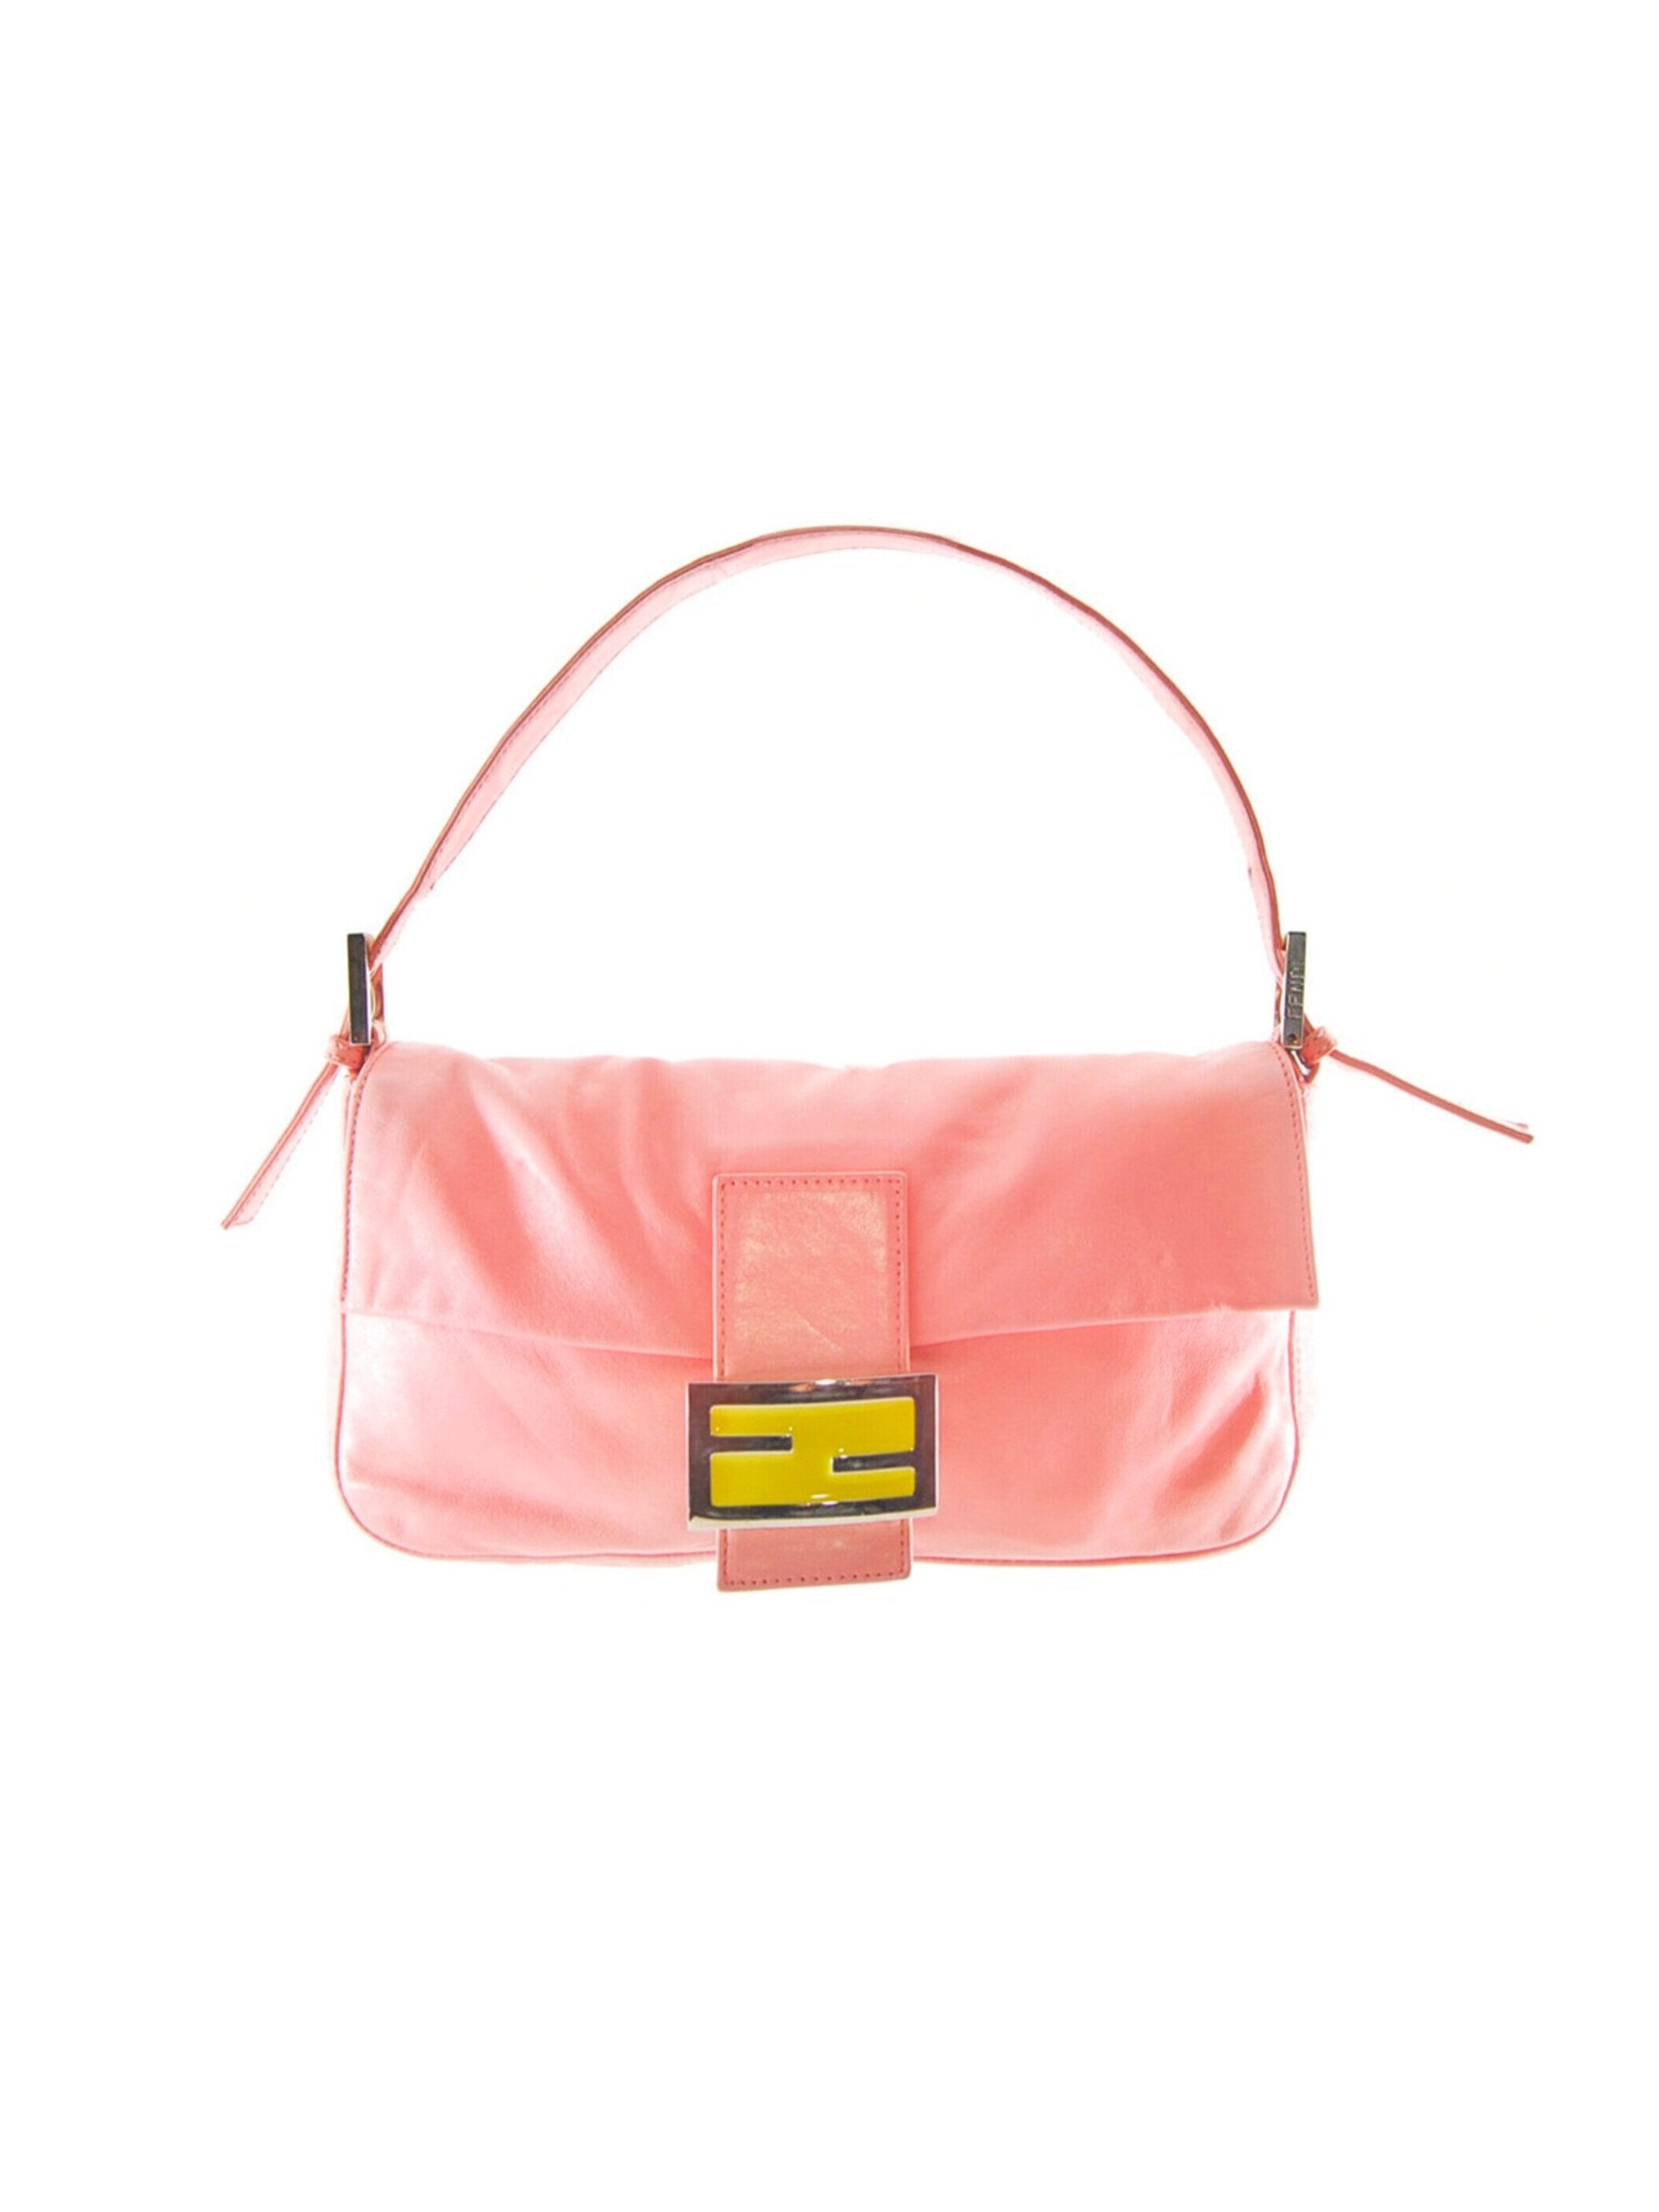 Fendi 2000s Pink and Yellow Leather Baguette